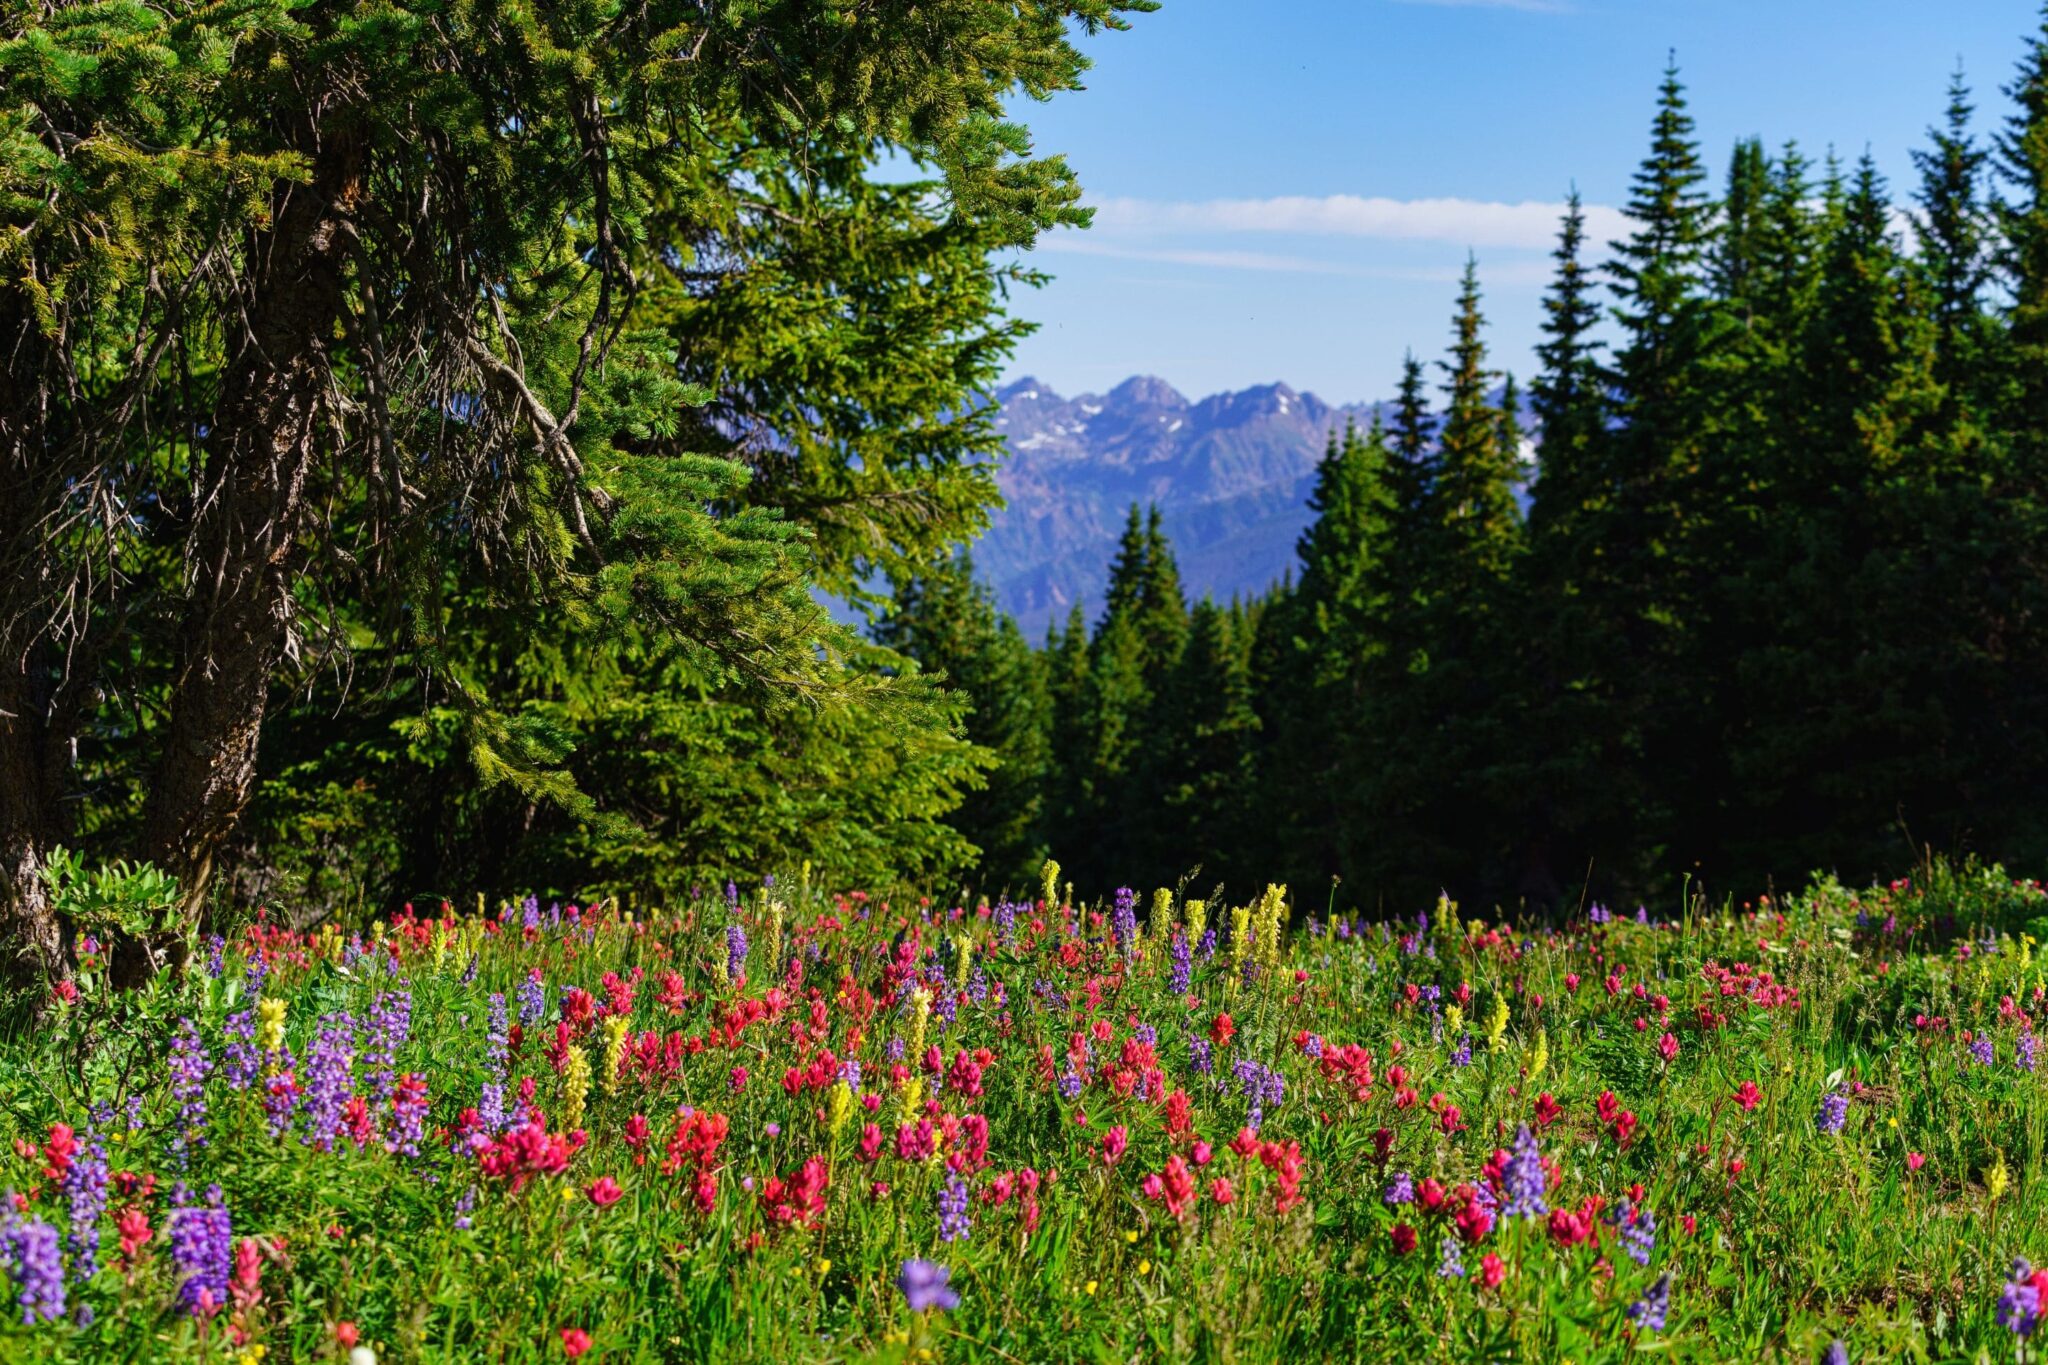 Vail in summer bloom with wildflowers in the foreground and mountains in the distance